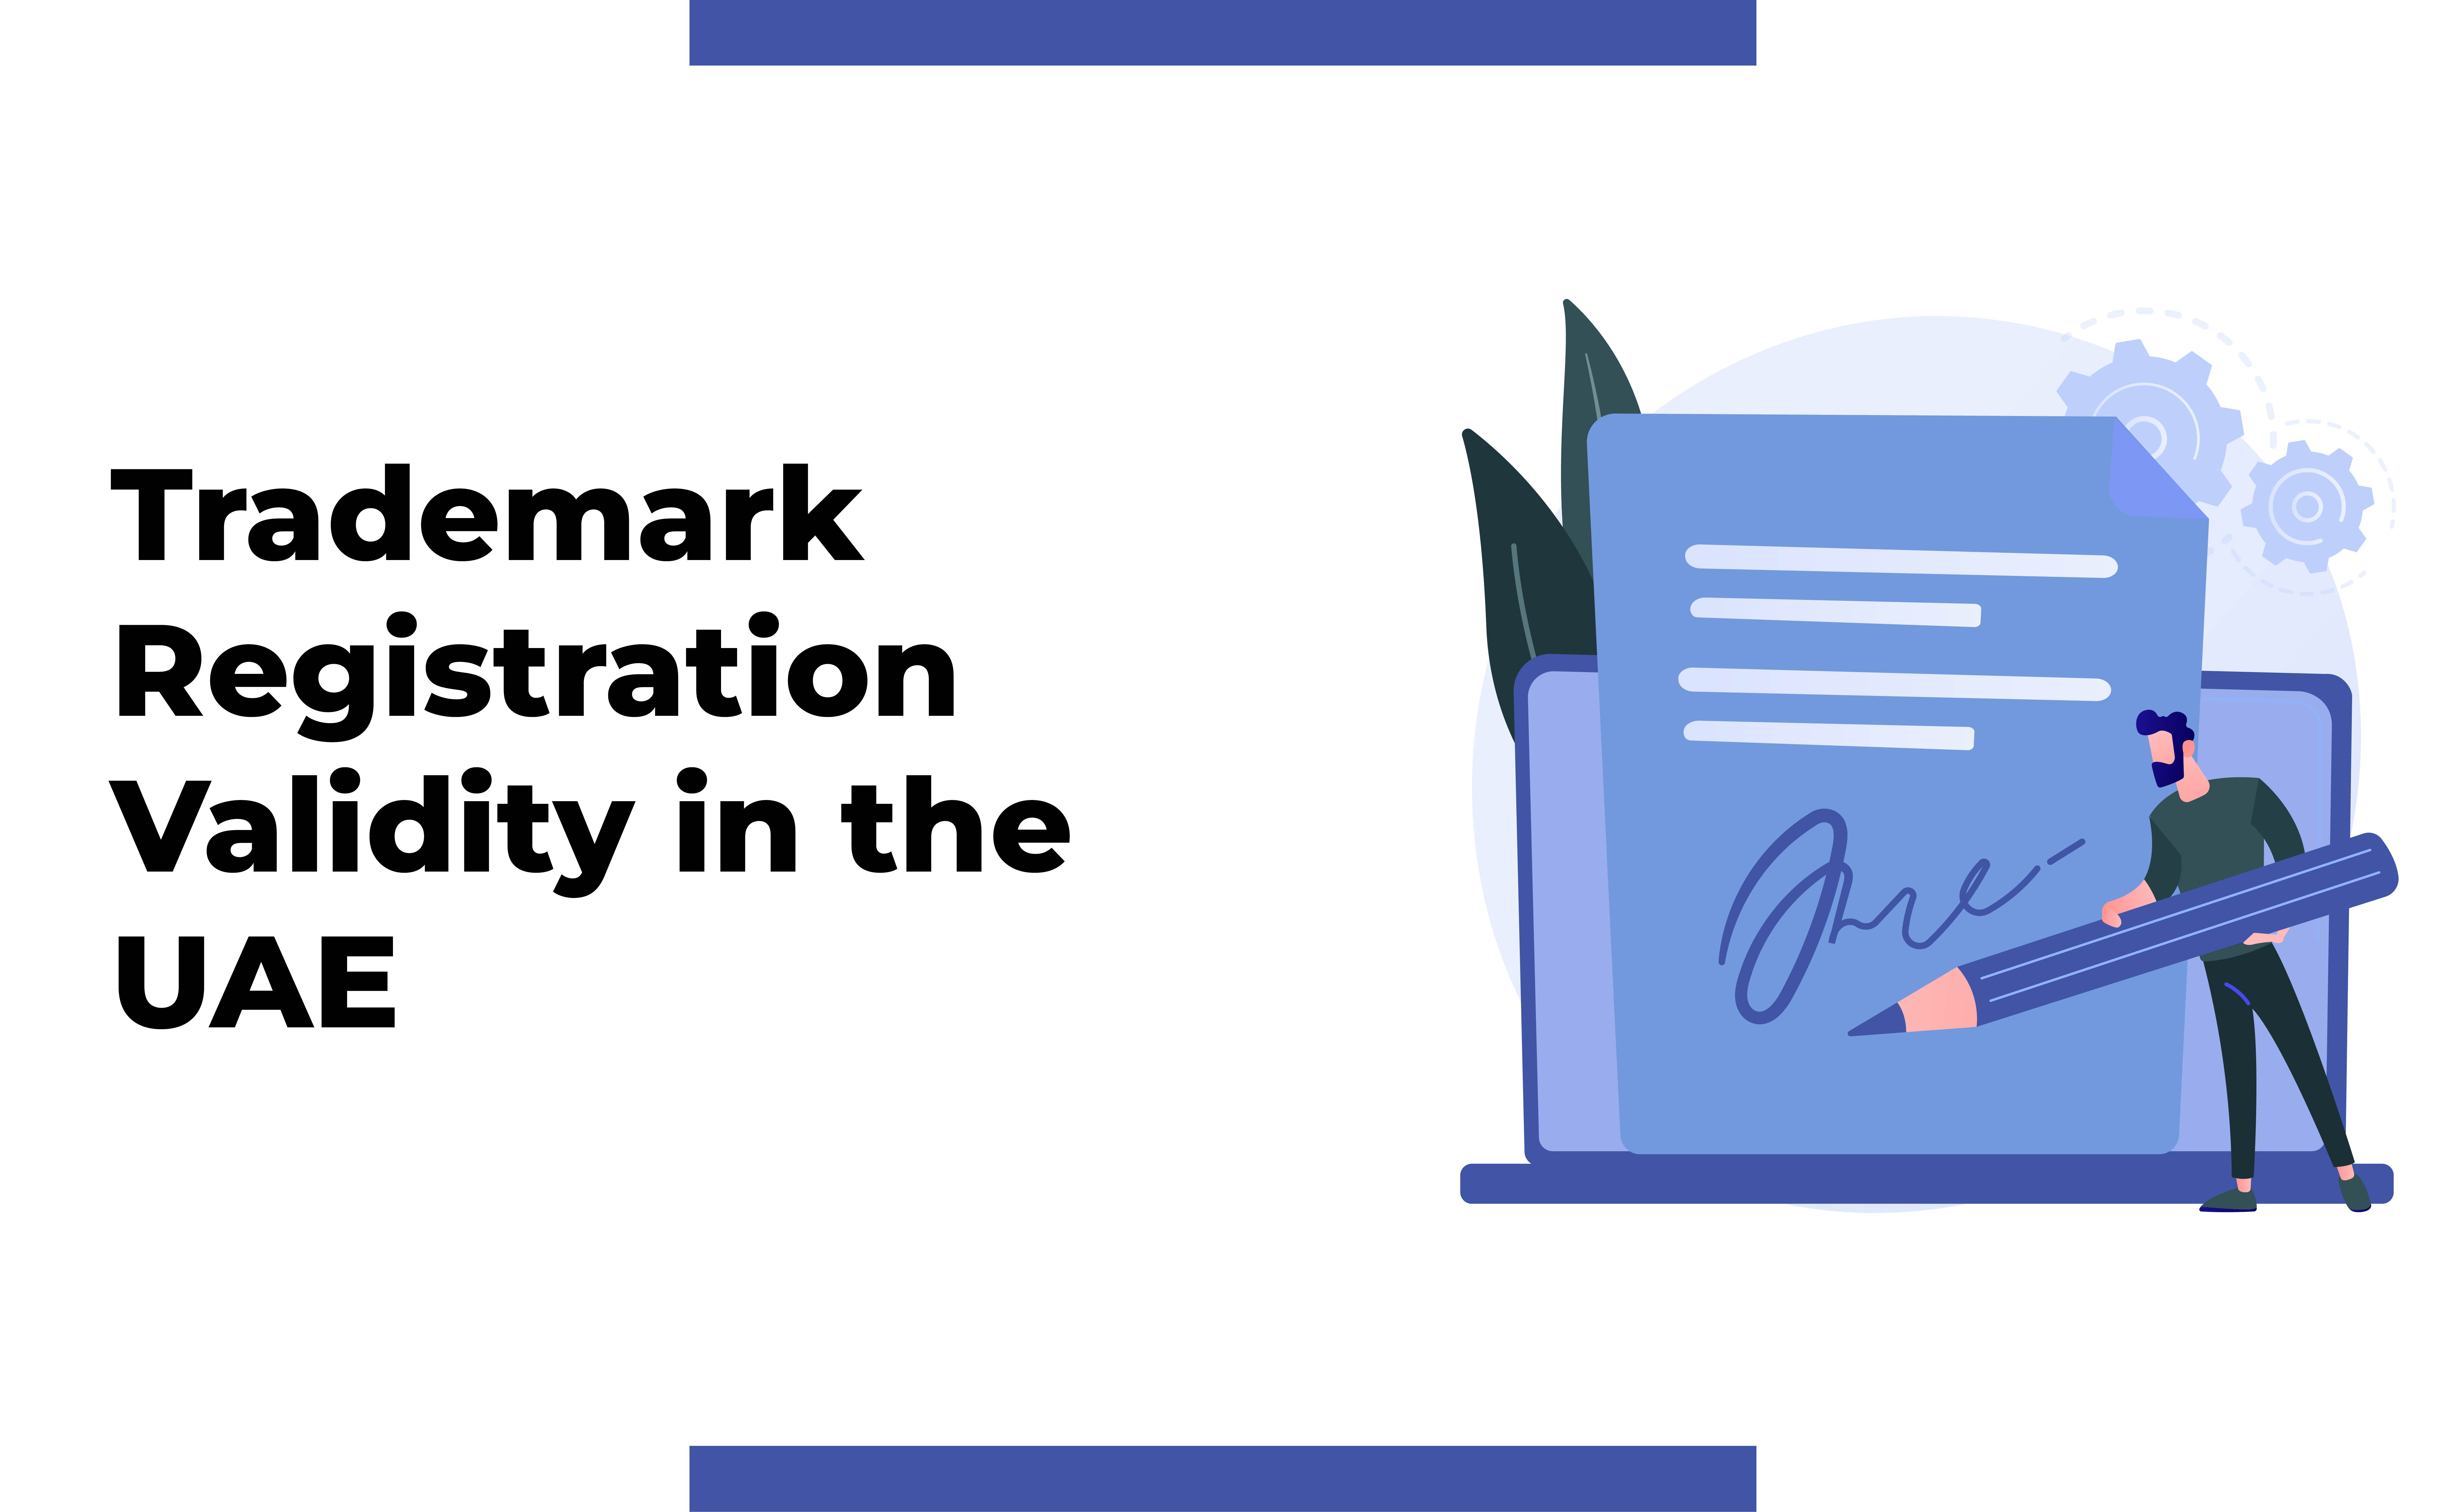 The validity of trademark registration in UAE